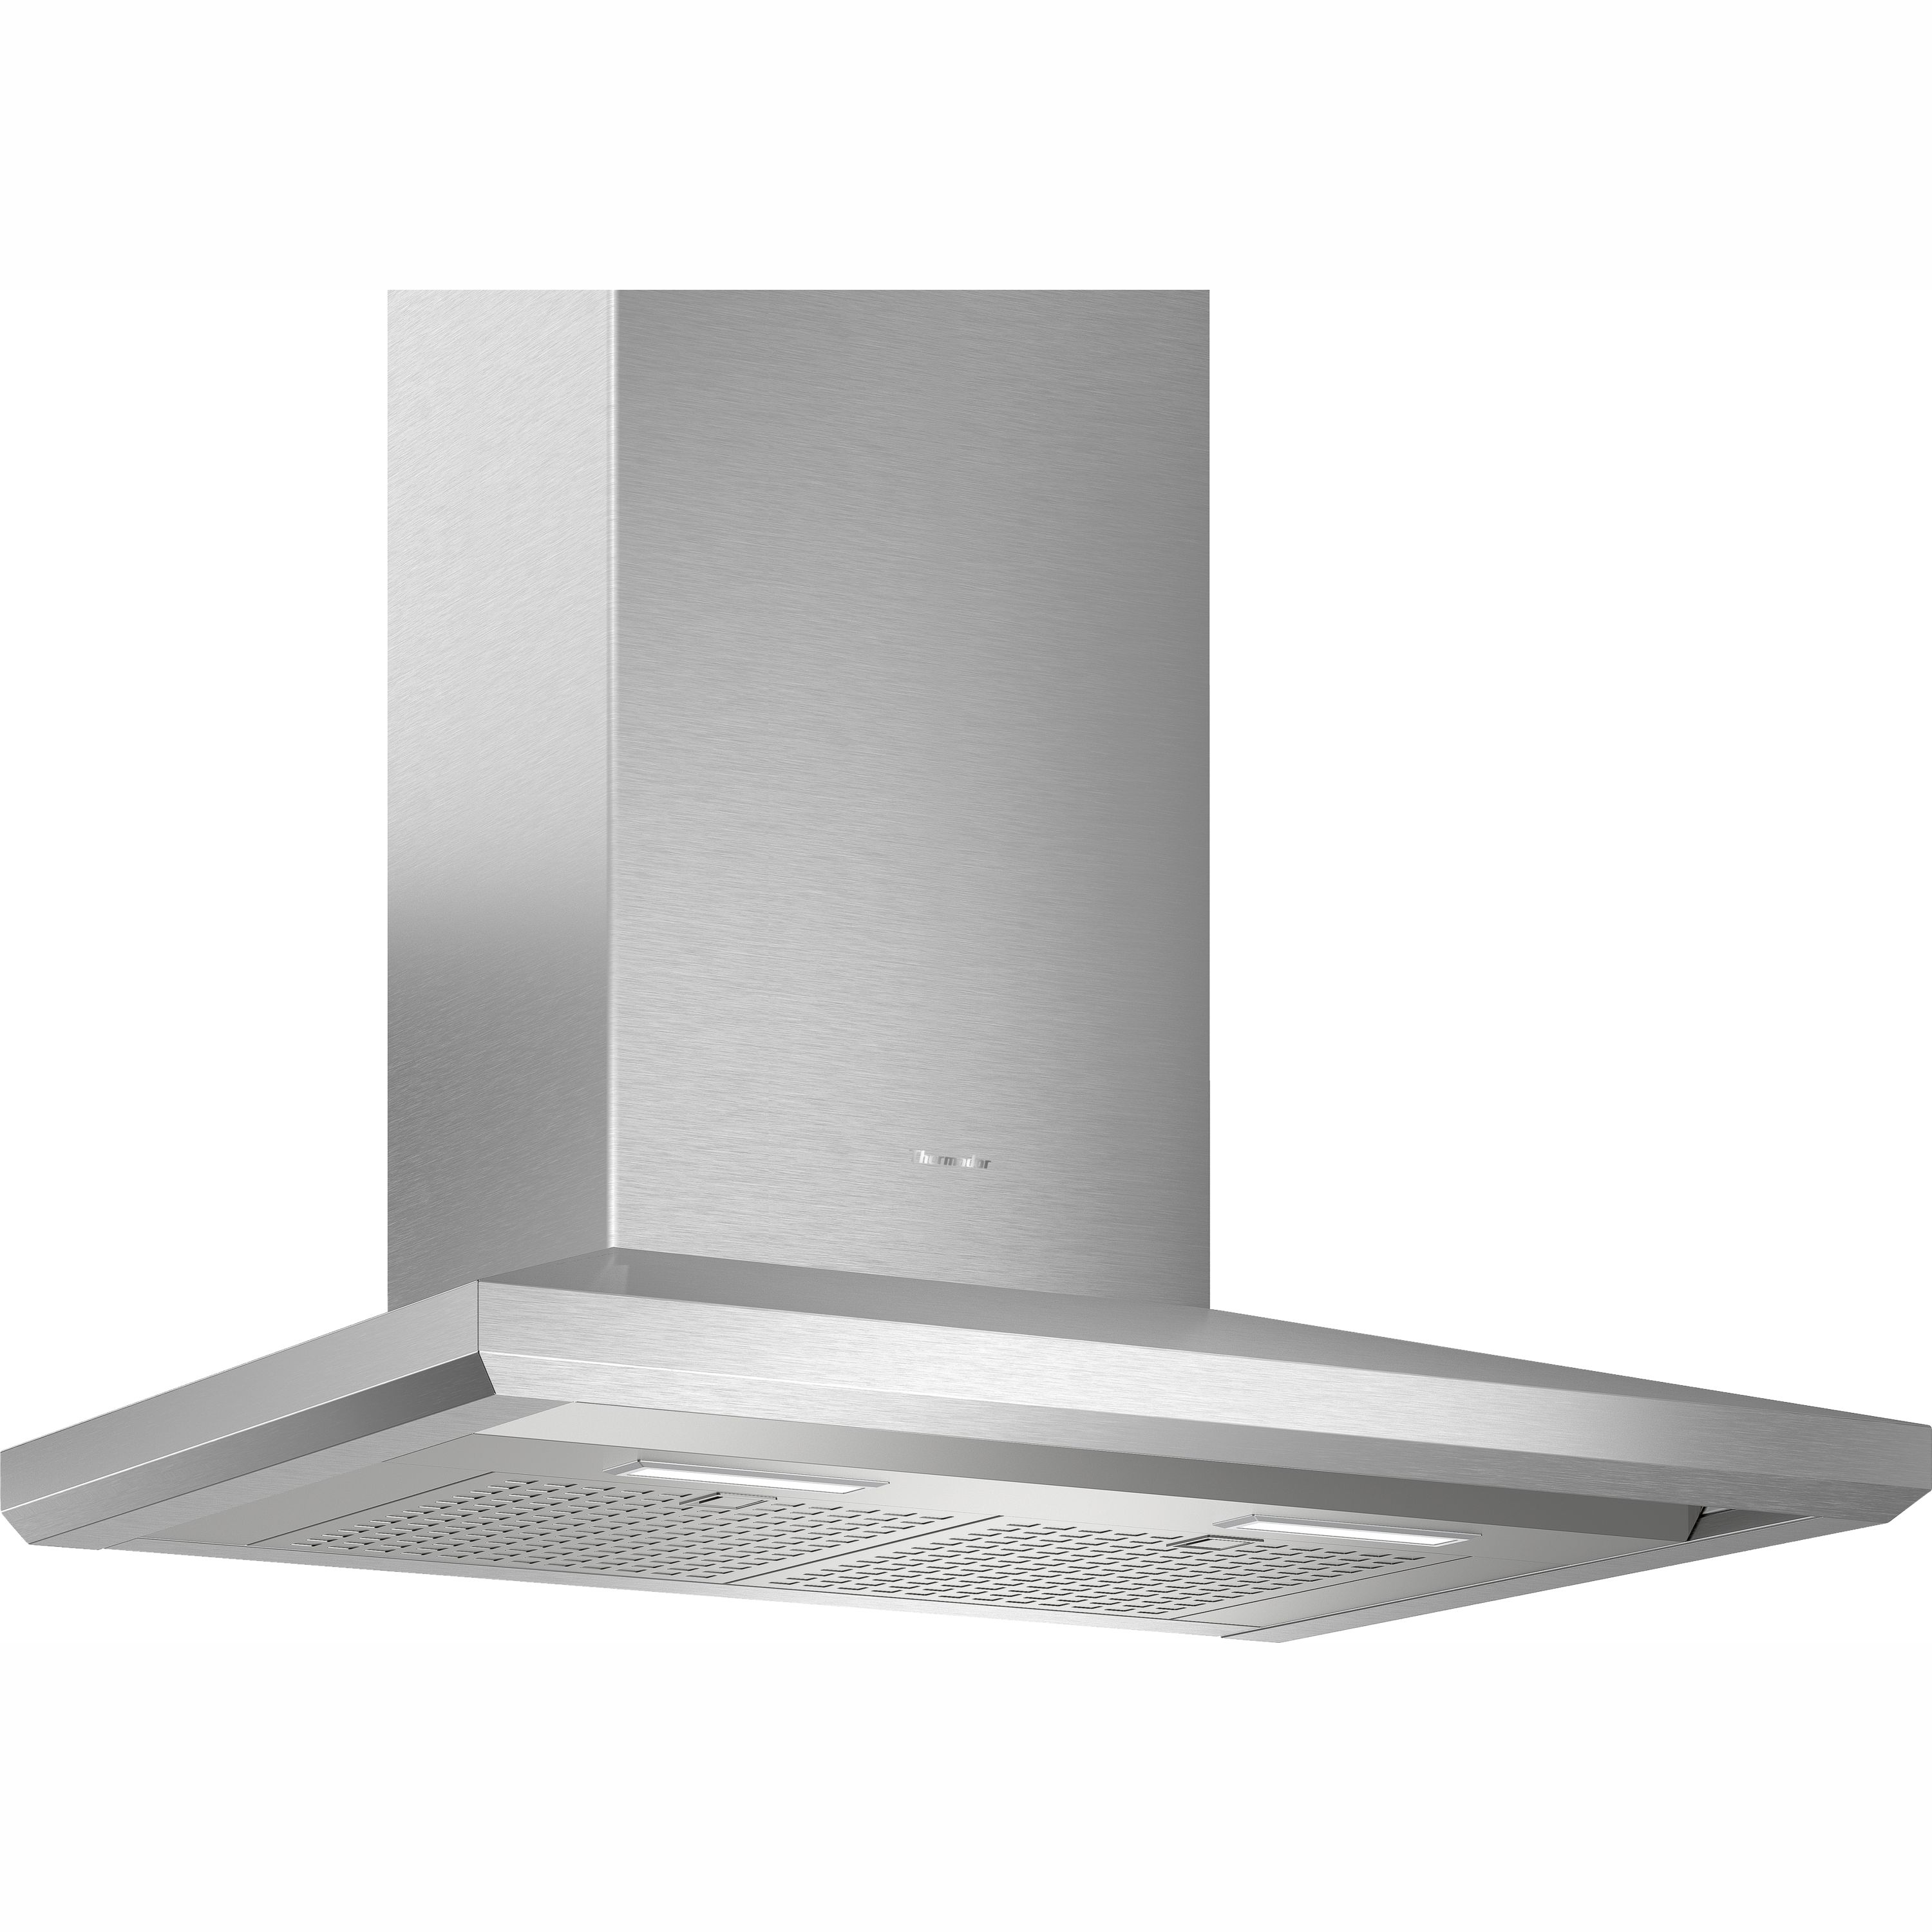 Thermador Masterpiece®, Pyramid Chimney Wall Hood, 30'', Stainless Steel